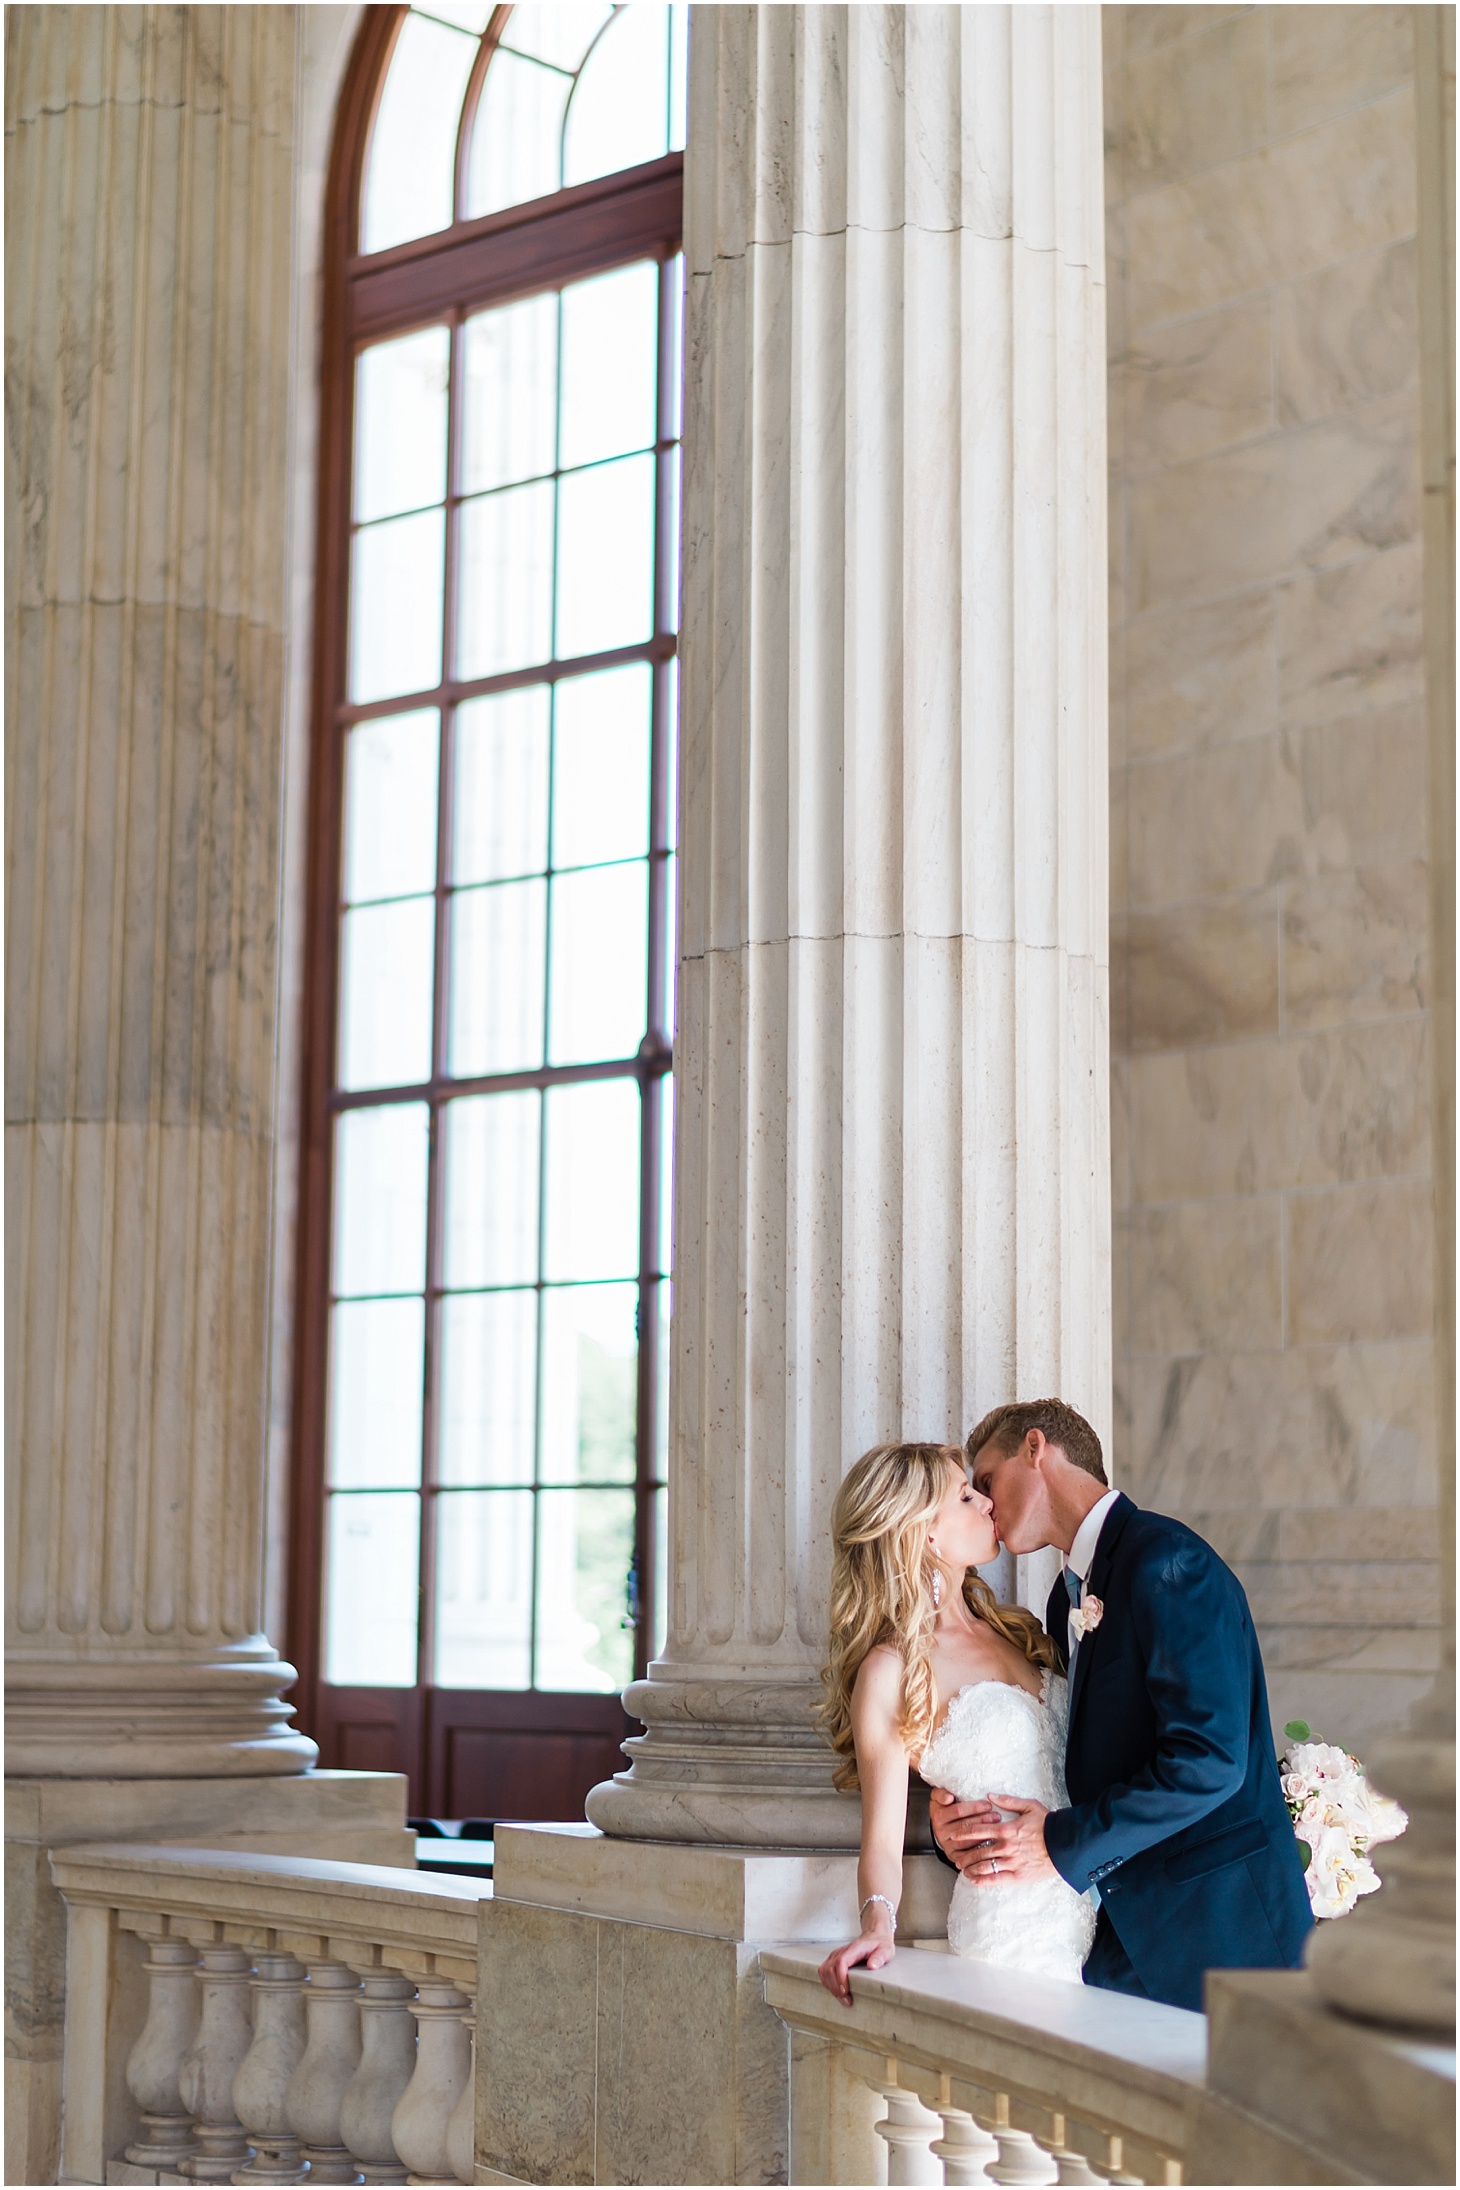 Wedding Portraits at US Capitol, Navy and Blush Summer Wedding at the Army and Navy Club, Ceremony at Capitol Hill Baptist Church, Sarah Bradshaw Photography, DC Wedding Photographer